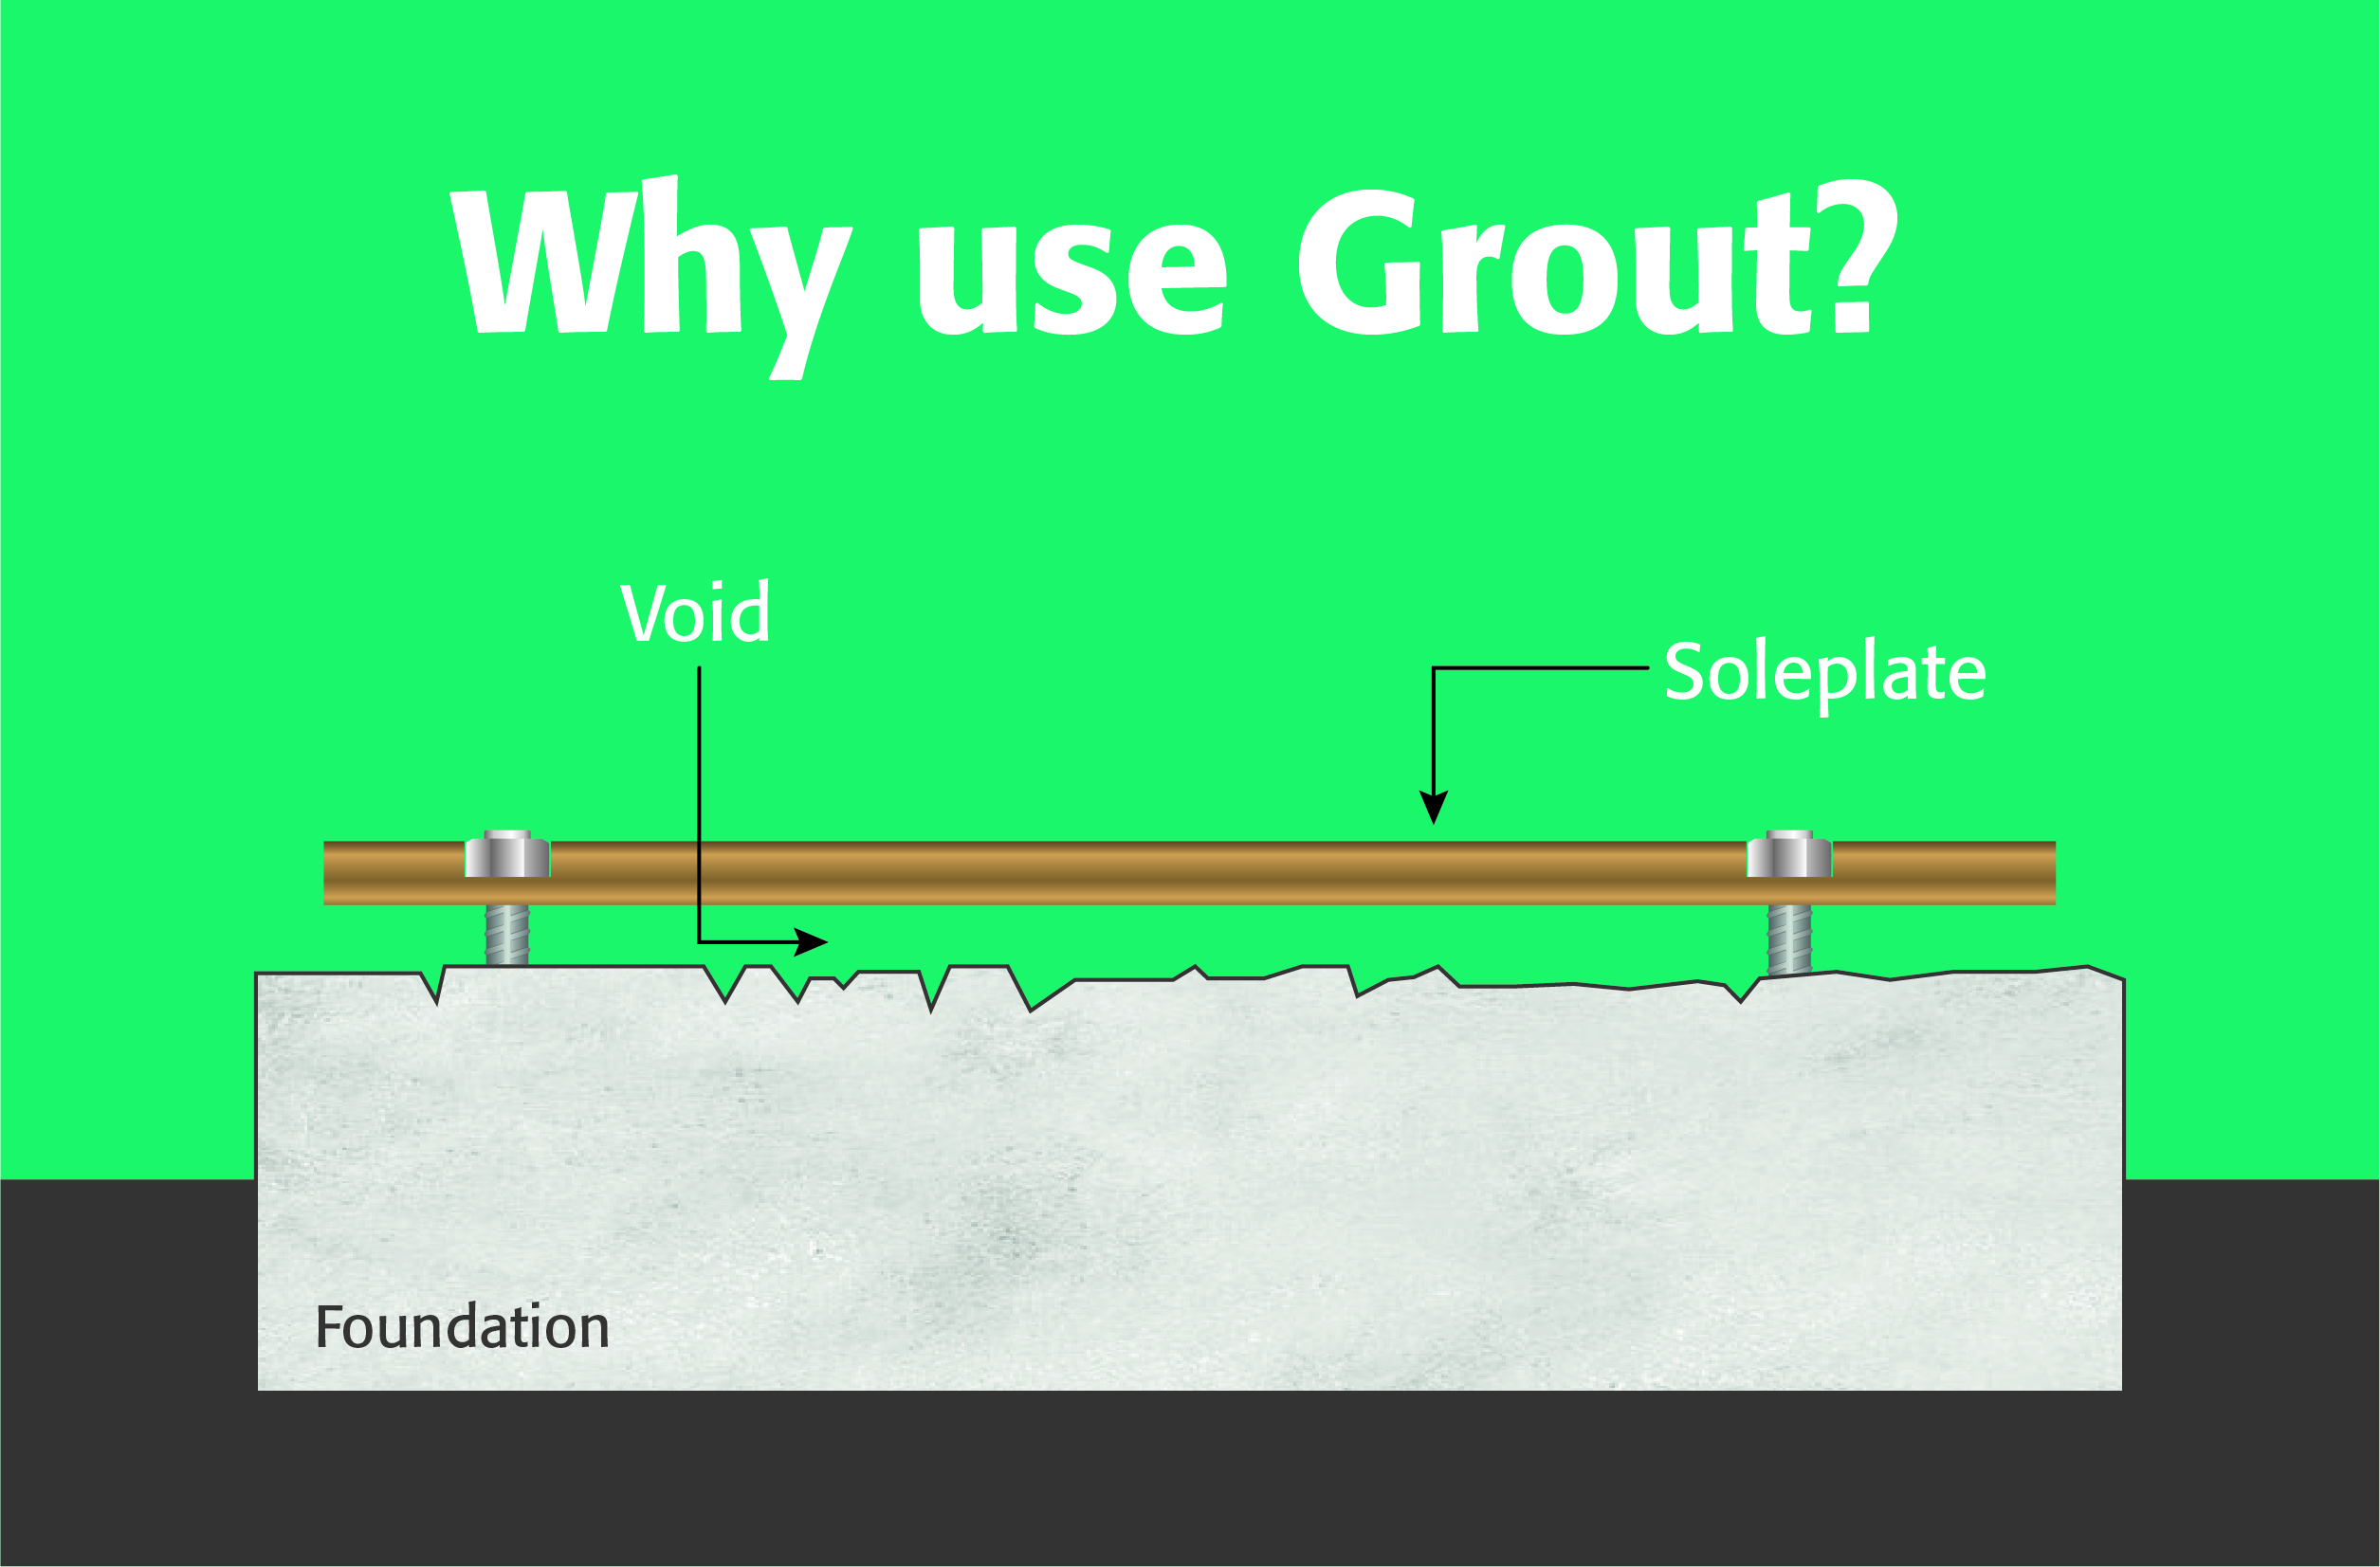 why use grout-illustration.jpg